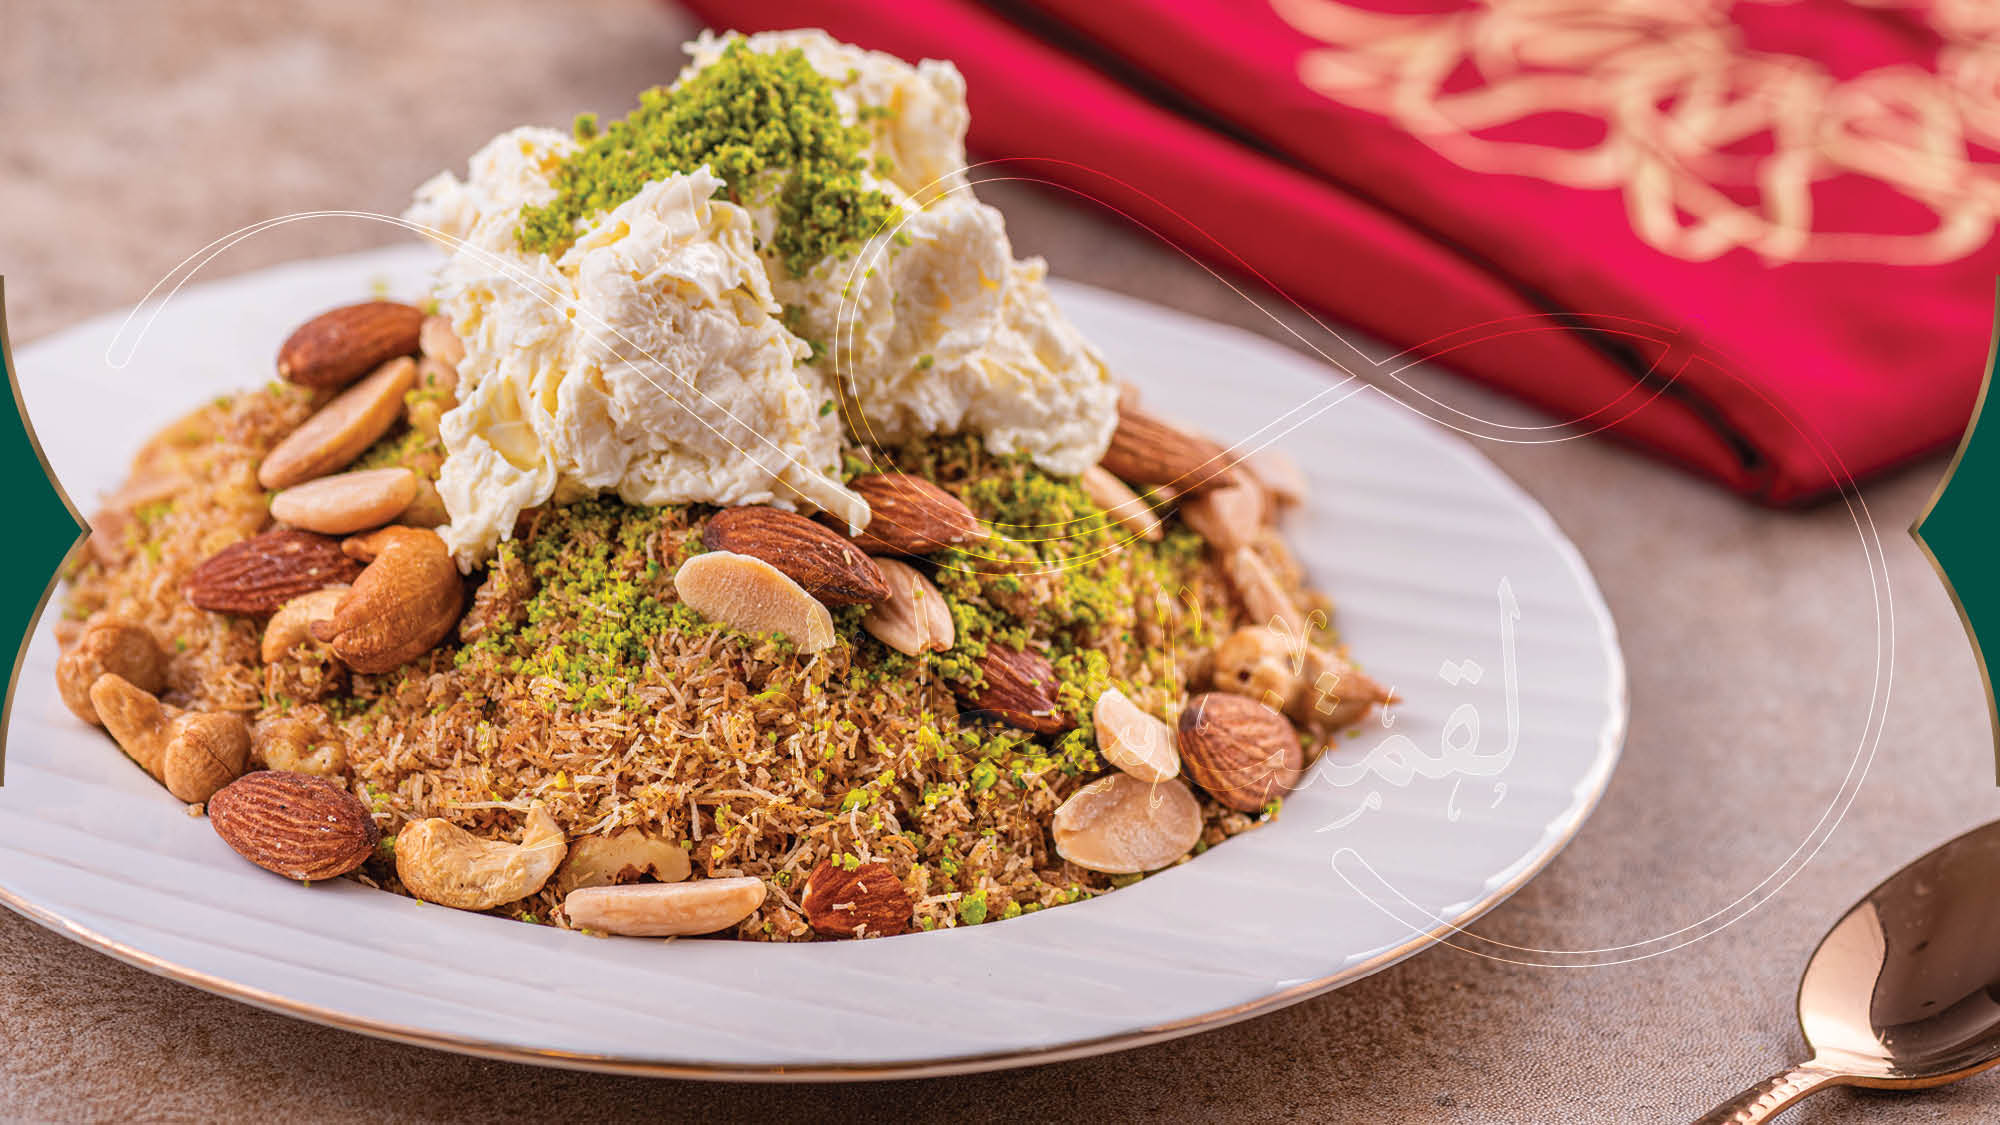 Uncover the Magic of Our Sweets: Best Arabic Desserts and Sweets